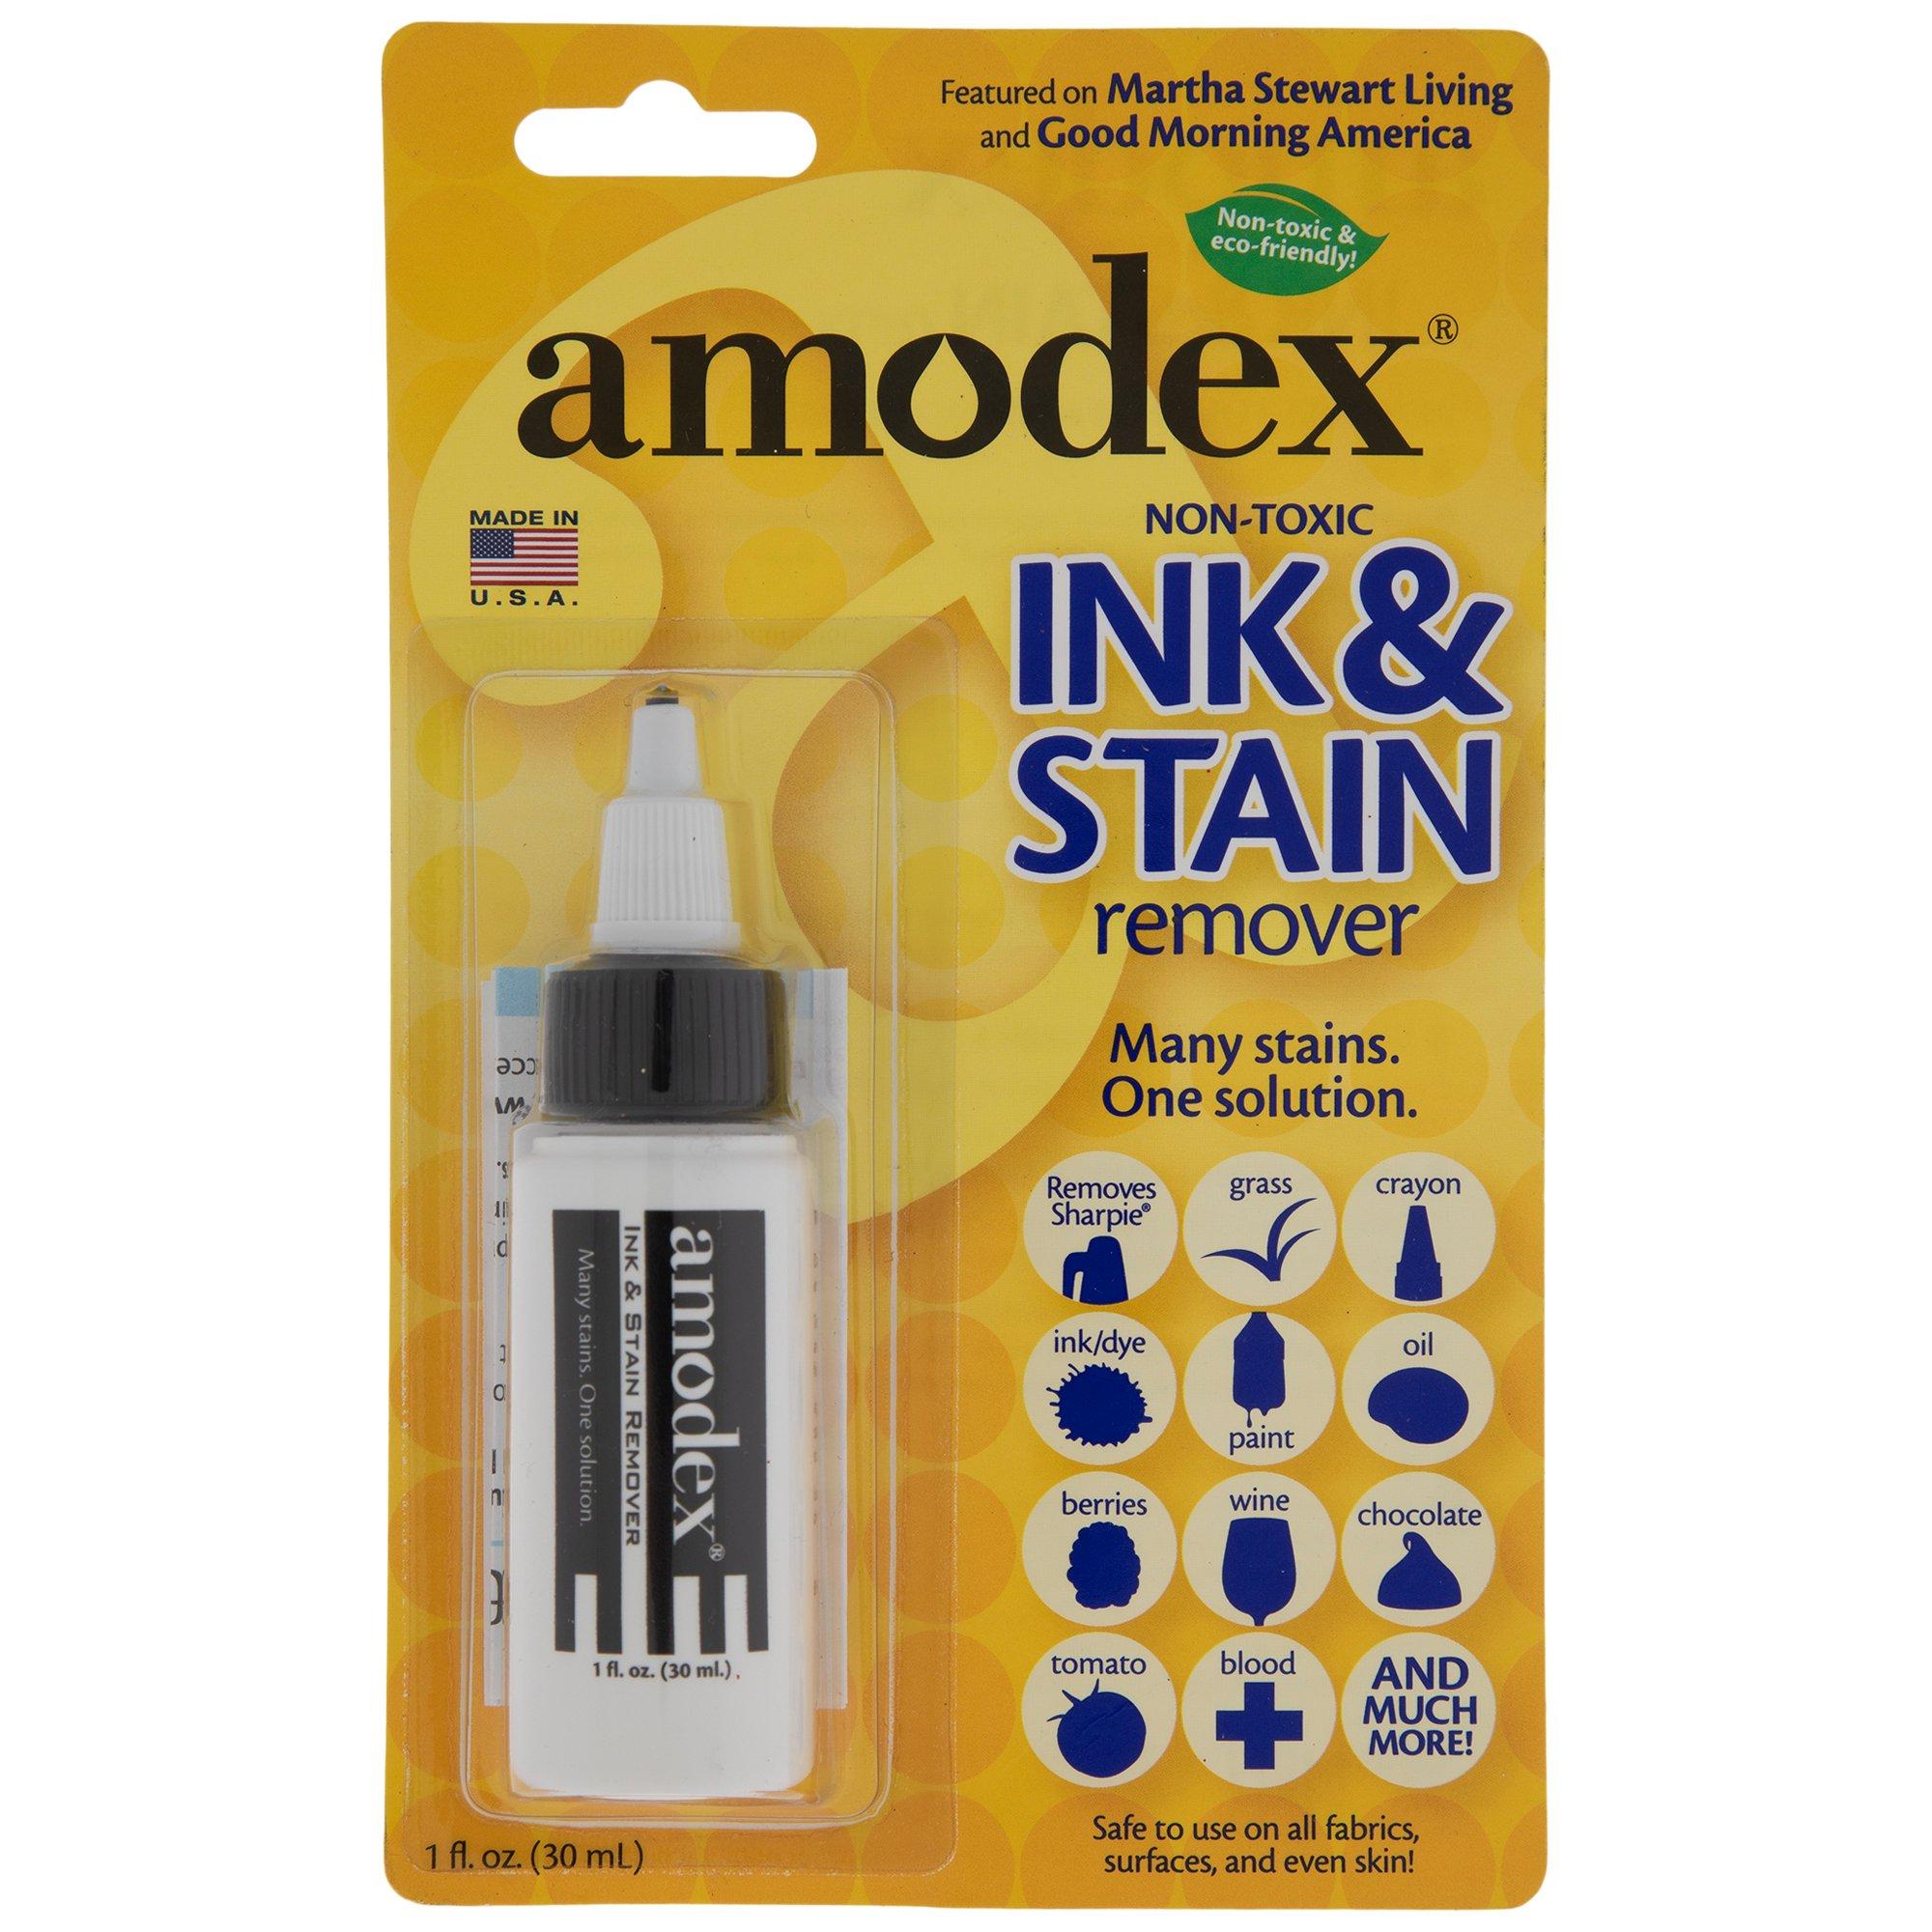 NEW BOX 10x AMODEX INK + STAIN REMOVER CLEANER Wipe Non-Toxic Marker Paint  Wine